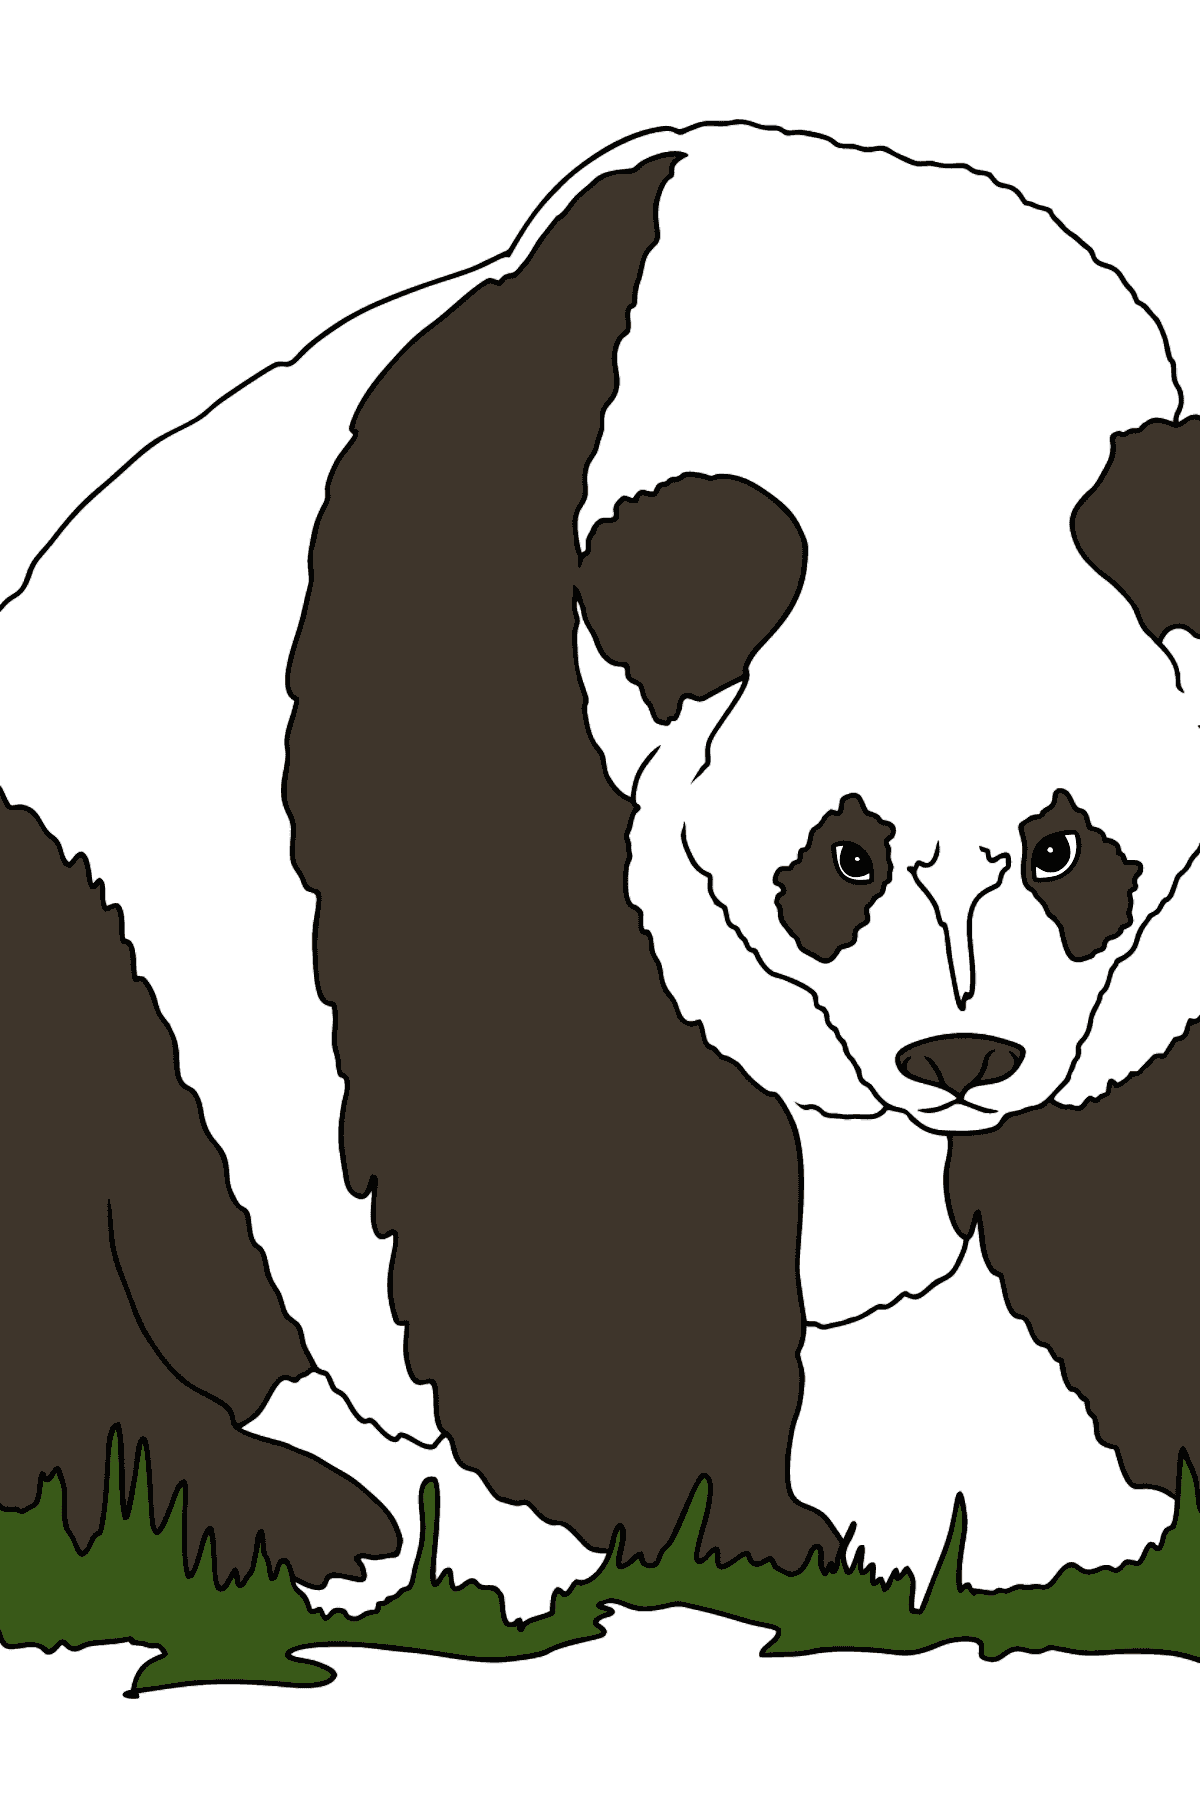 Coloring Page - A Panda is Standing - Coloring Pages for Kids